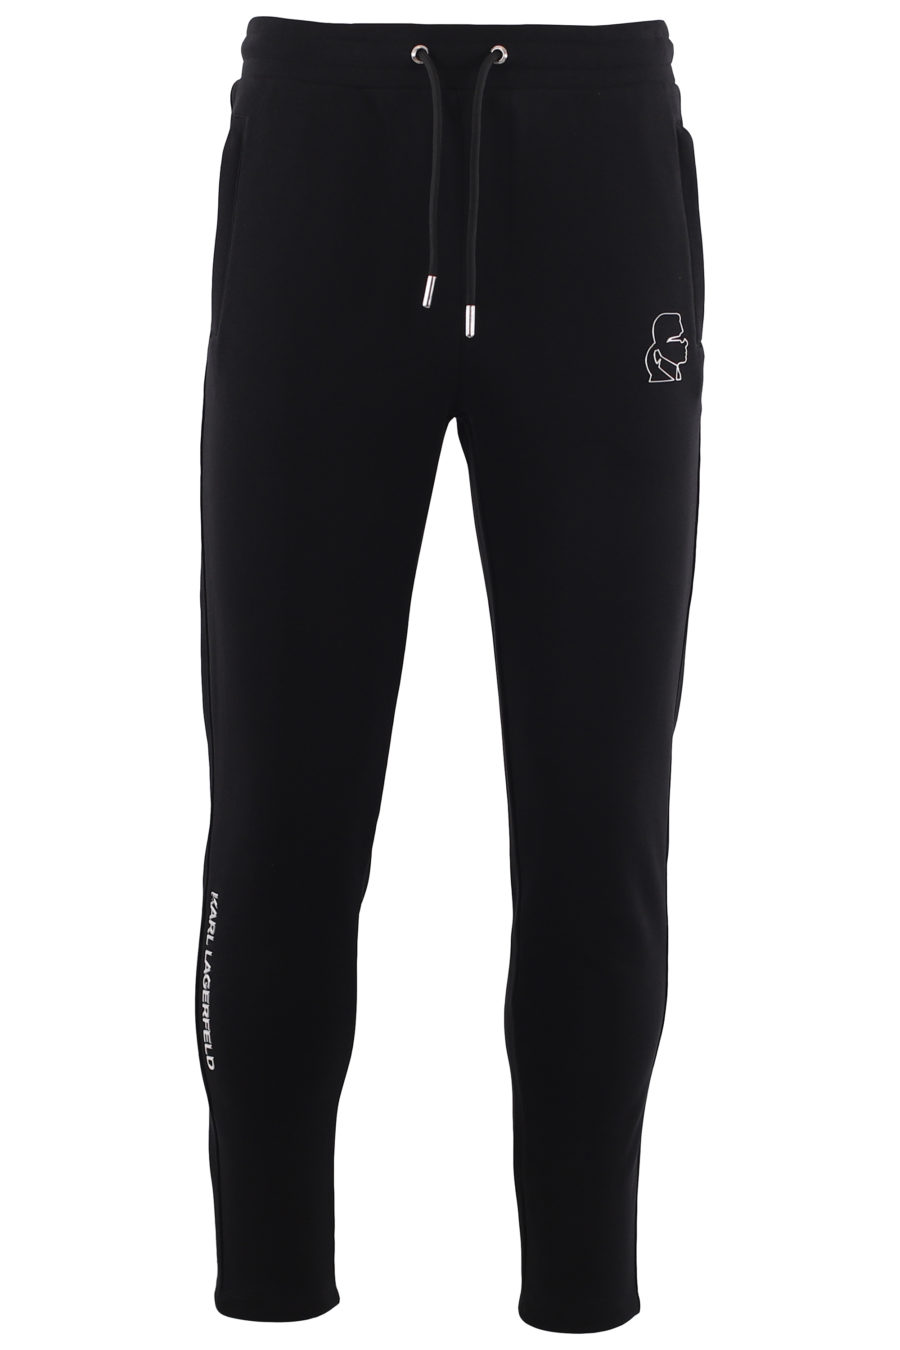 Tracksuit bottoms black with silver logo - IMG 6650